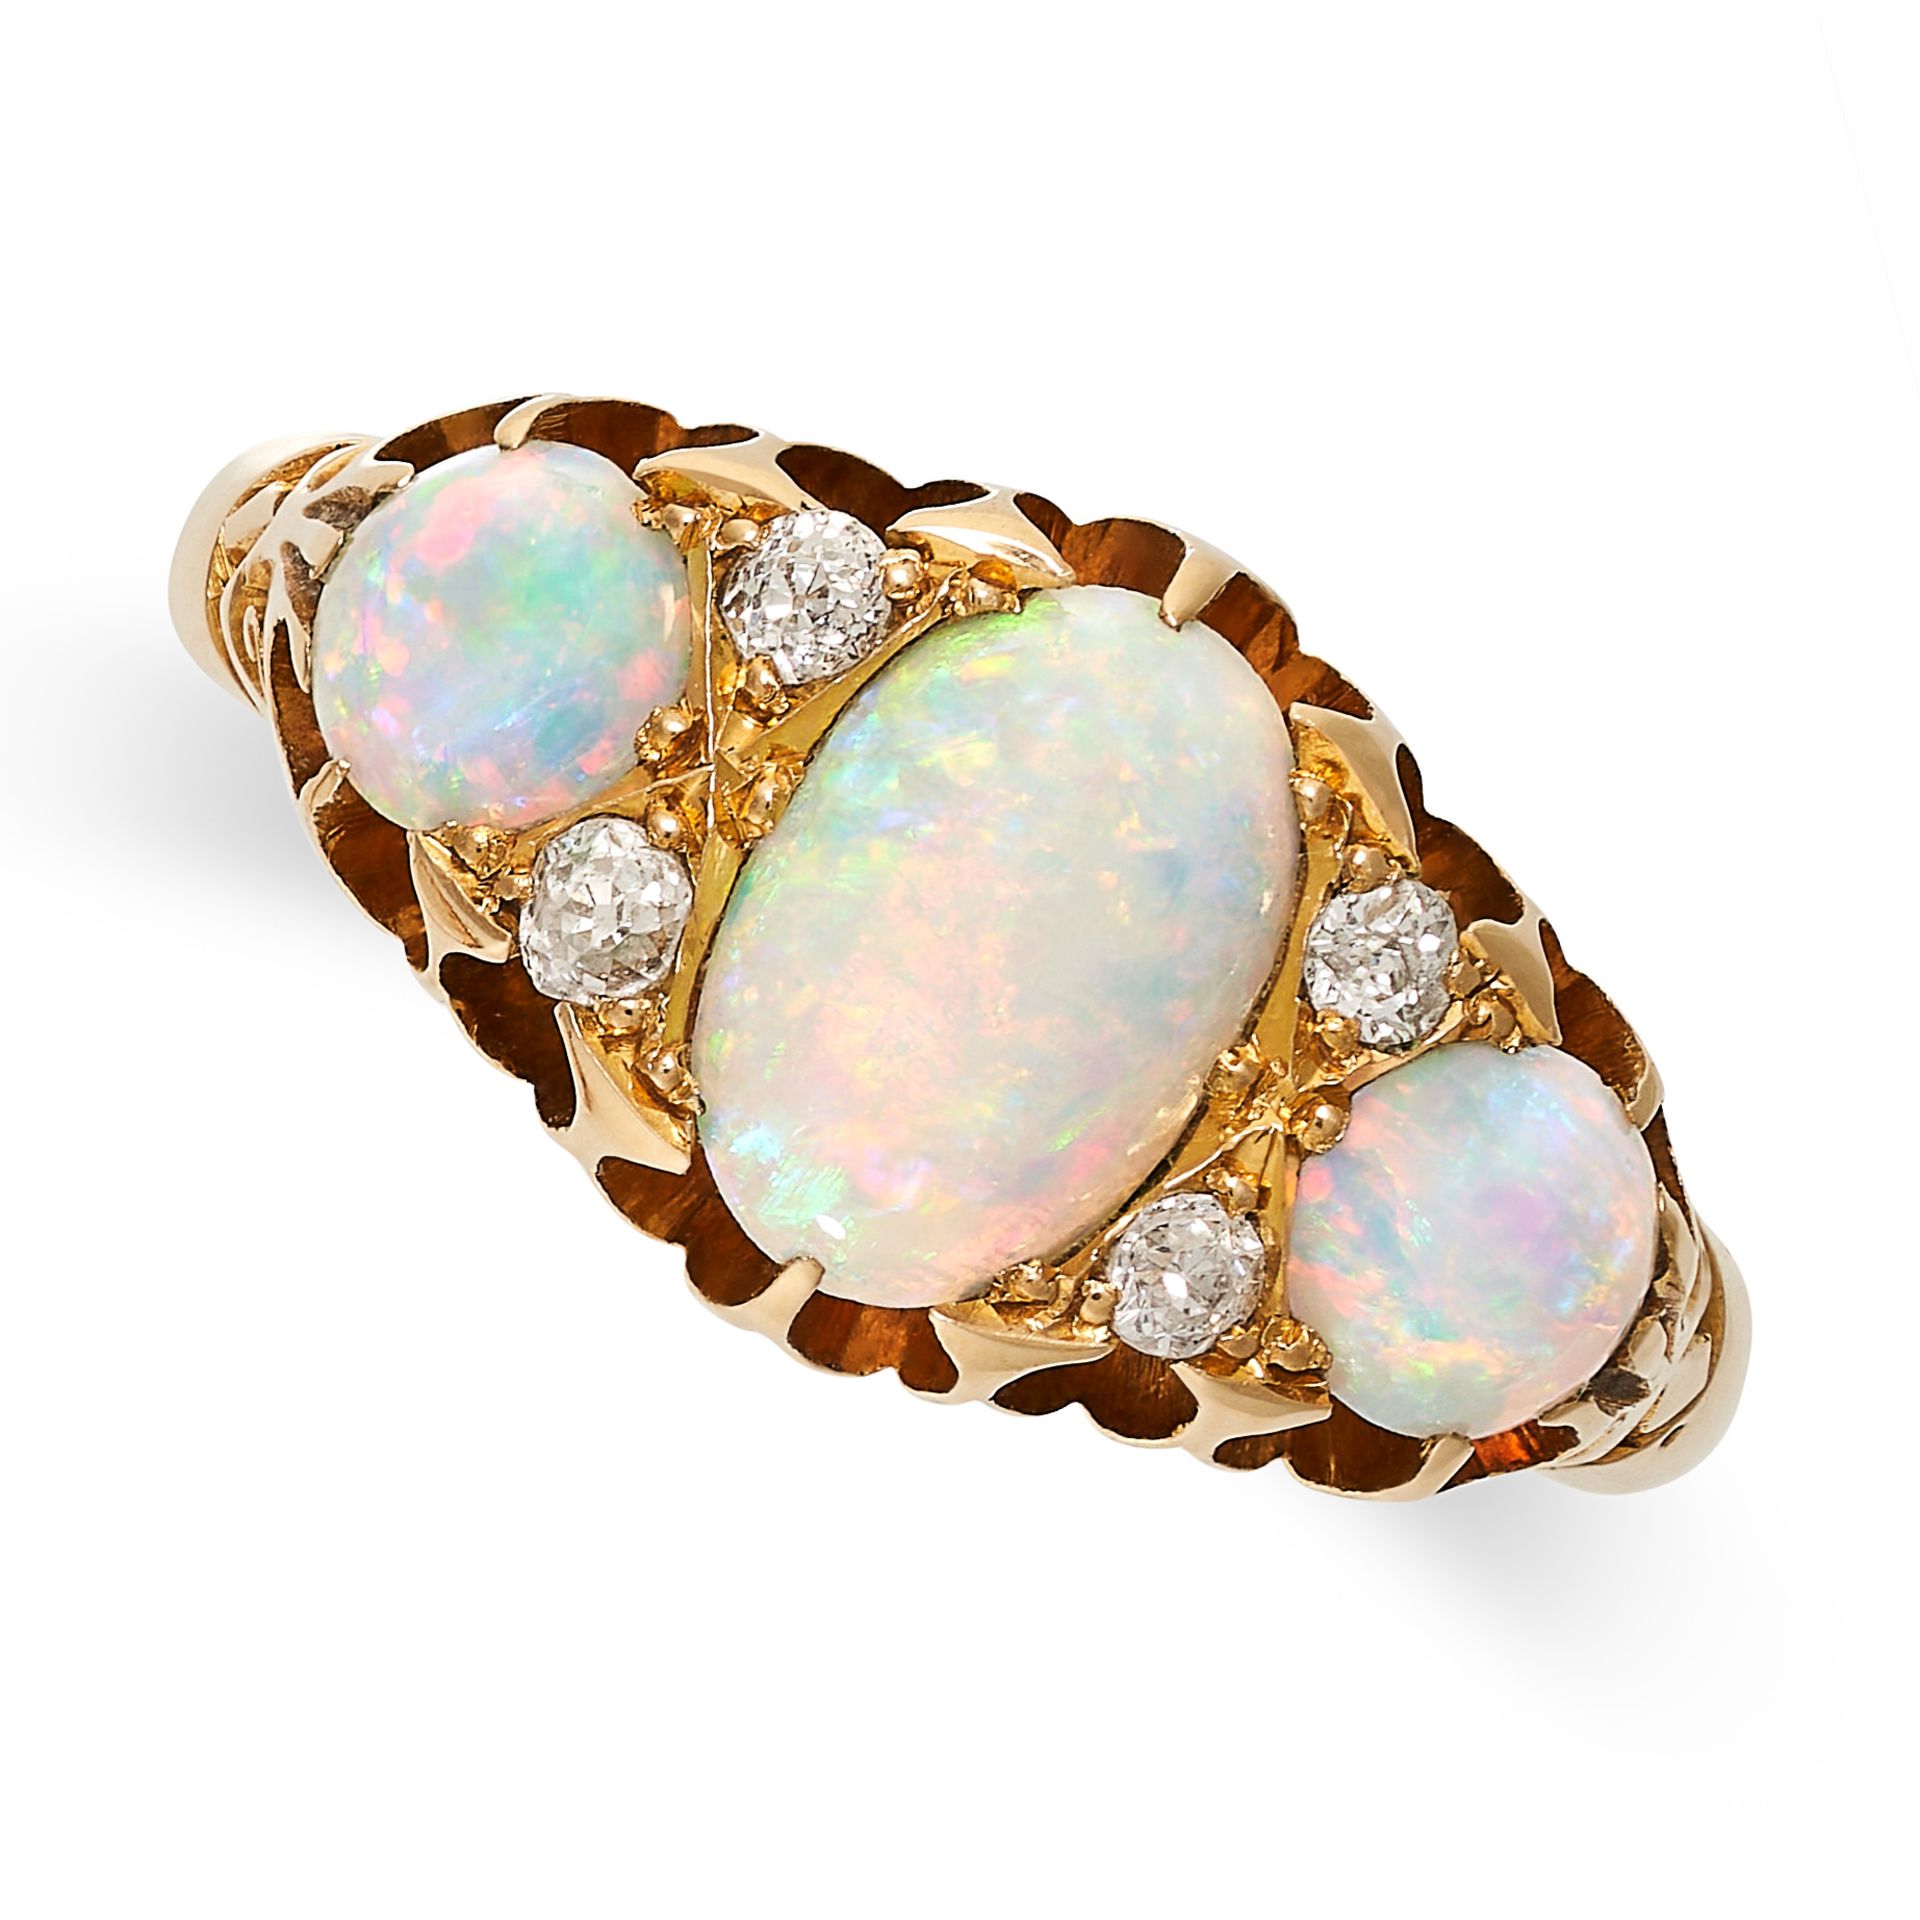 AN ANTIQUE VICTORIAN OPAL AND DIAMOND RING, 1897 in 18ct yellow gold, set with three graduated